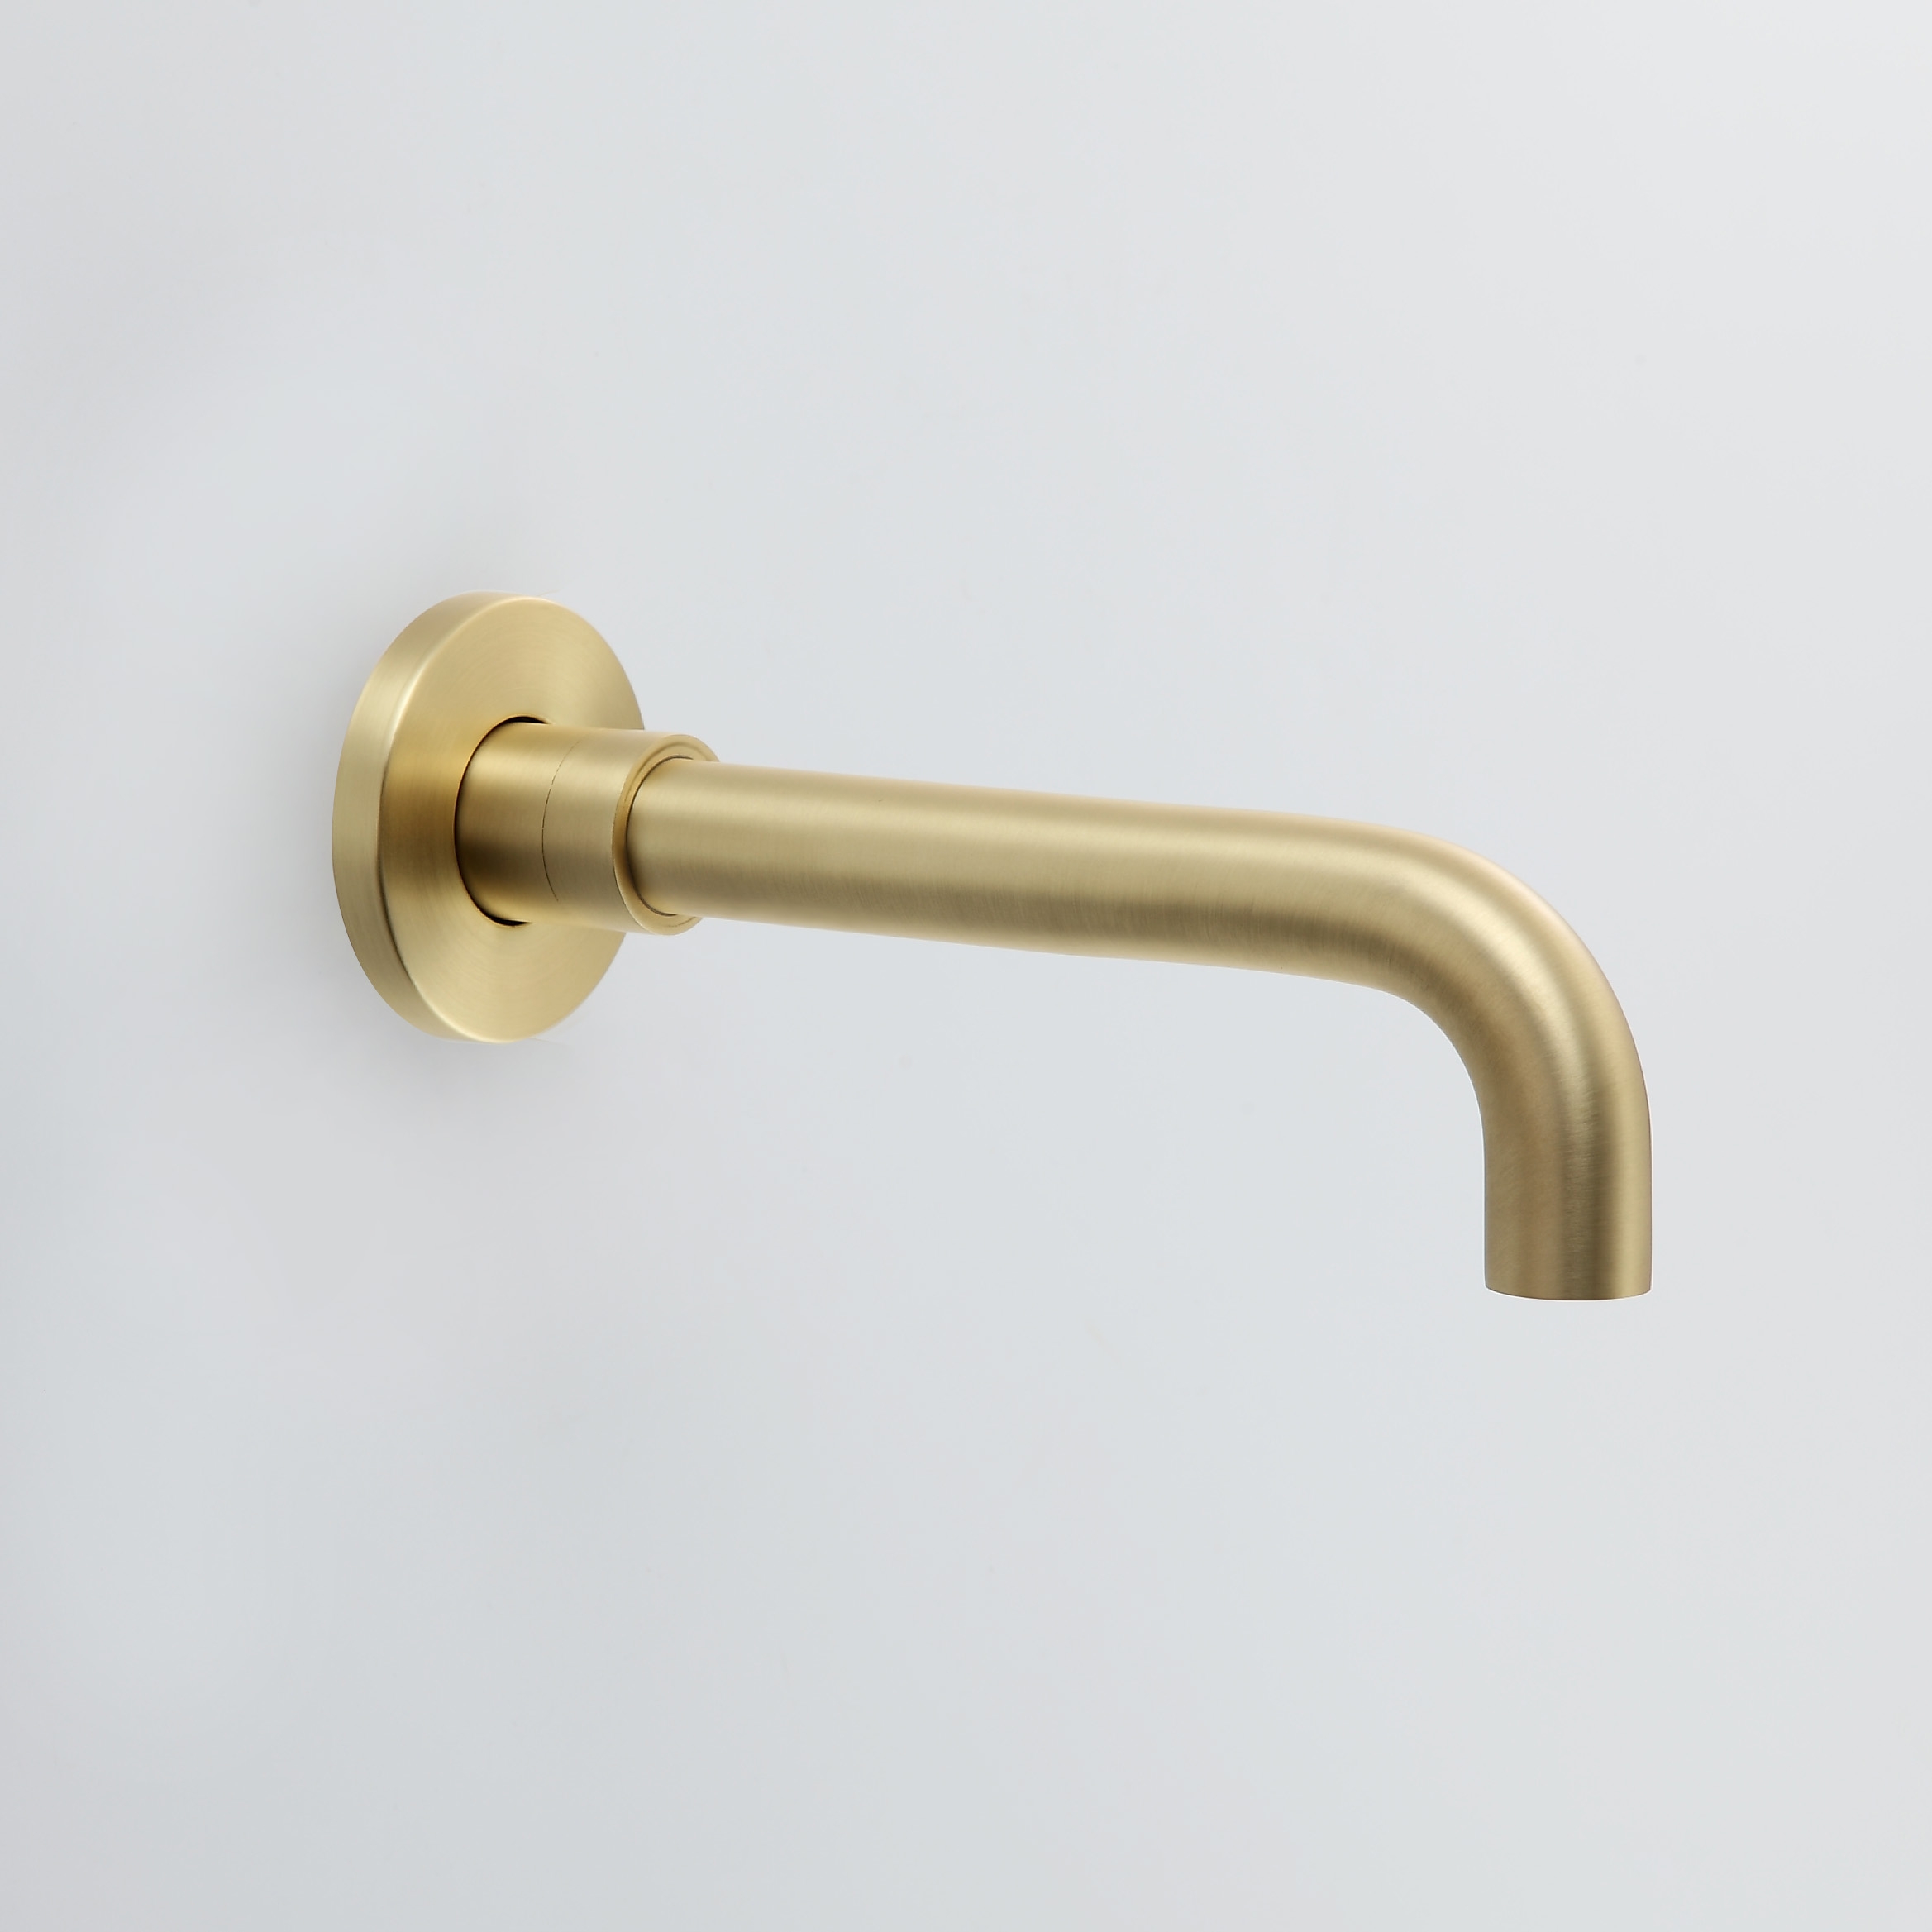 Brushed Brass Single Lever Handle Wall Mounted Bathroom Basin Tap Brass